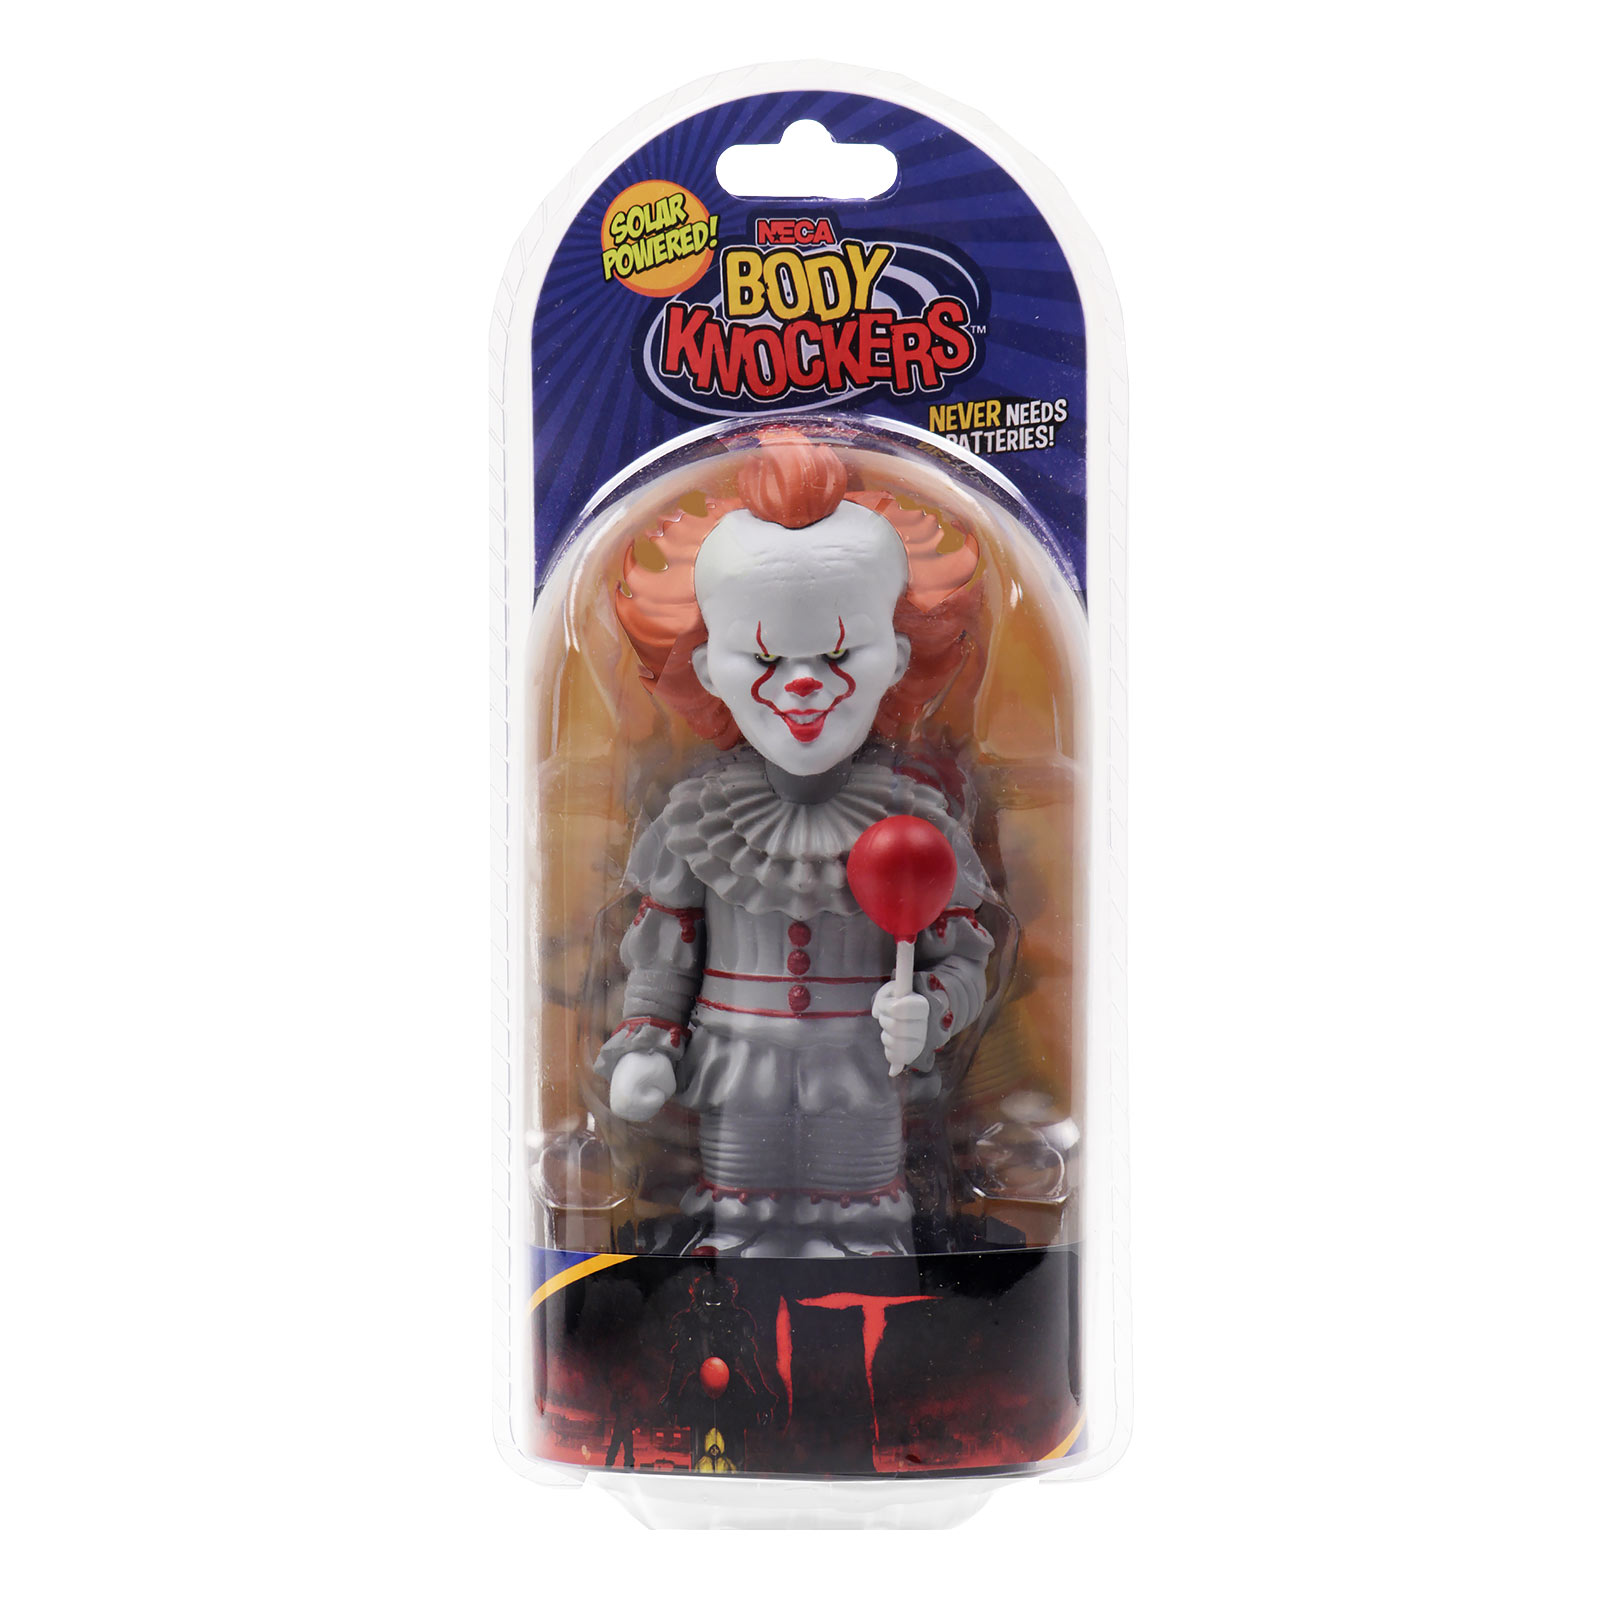 Stephen King's IT - Pennywise Body Knockers Solar Bobblehead